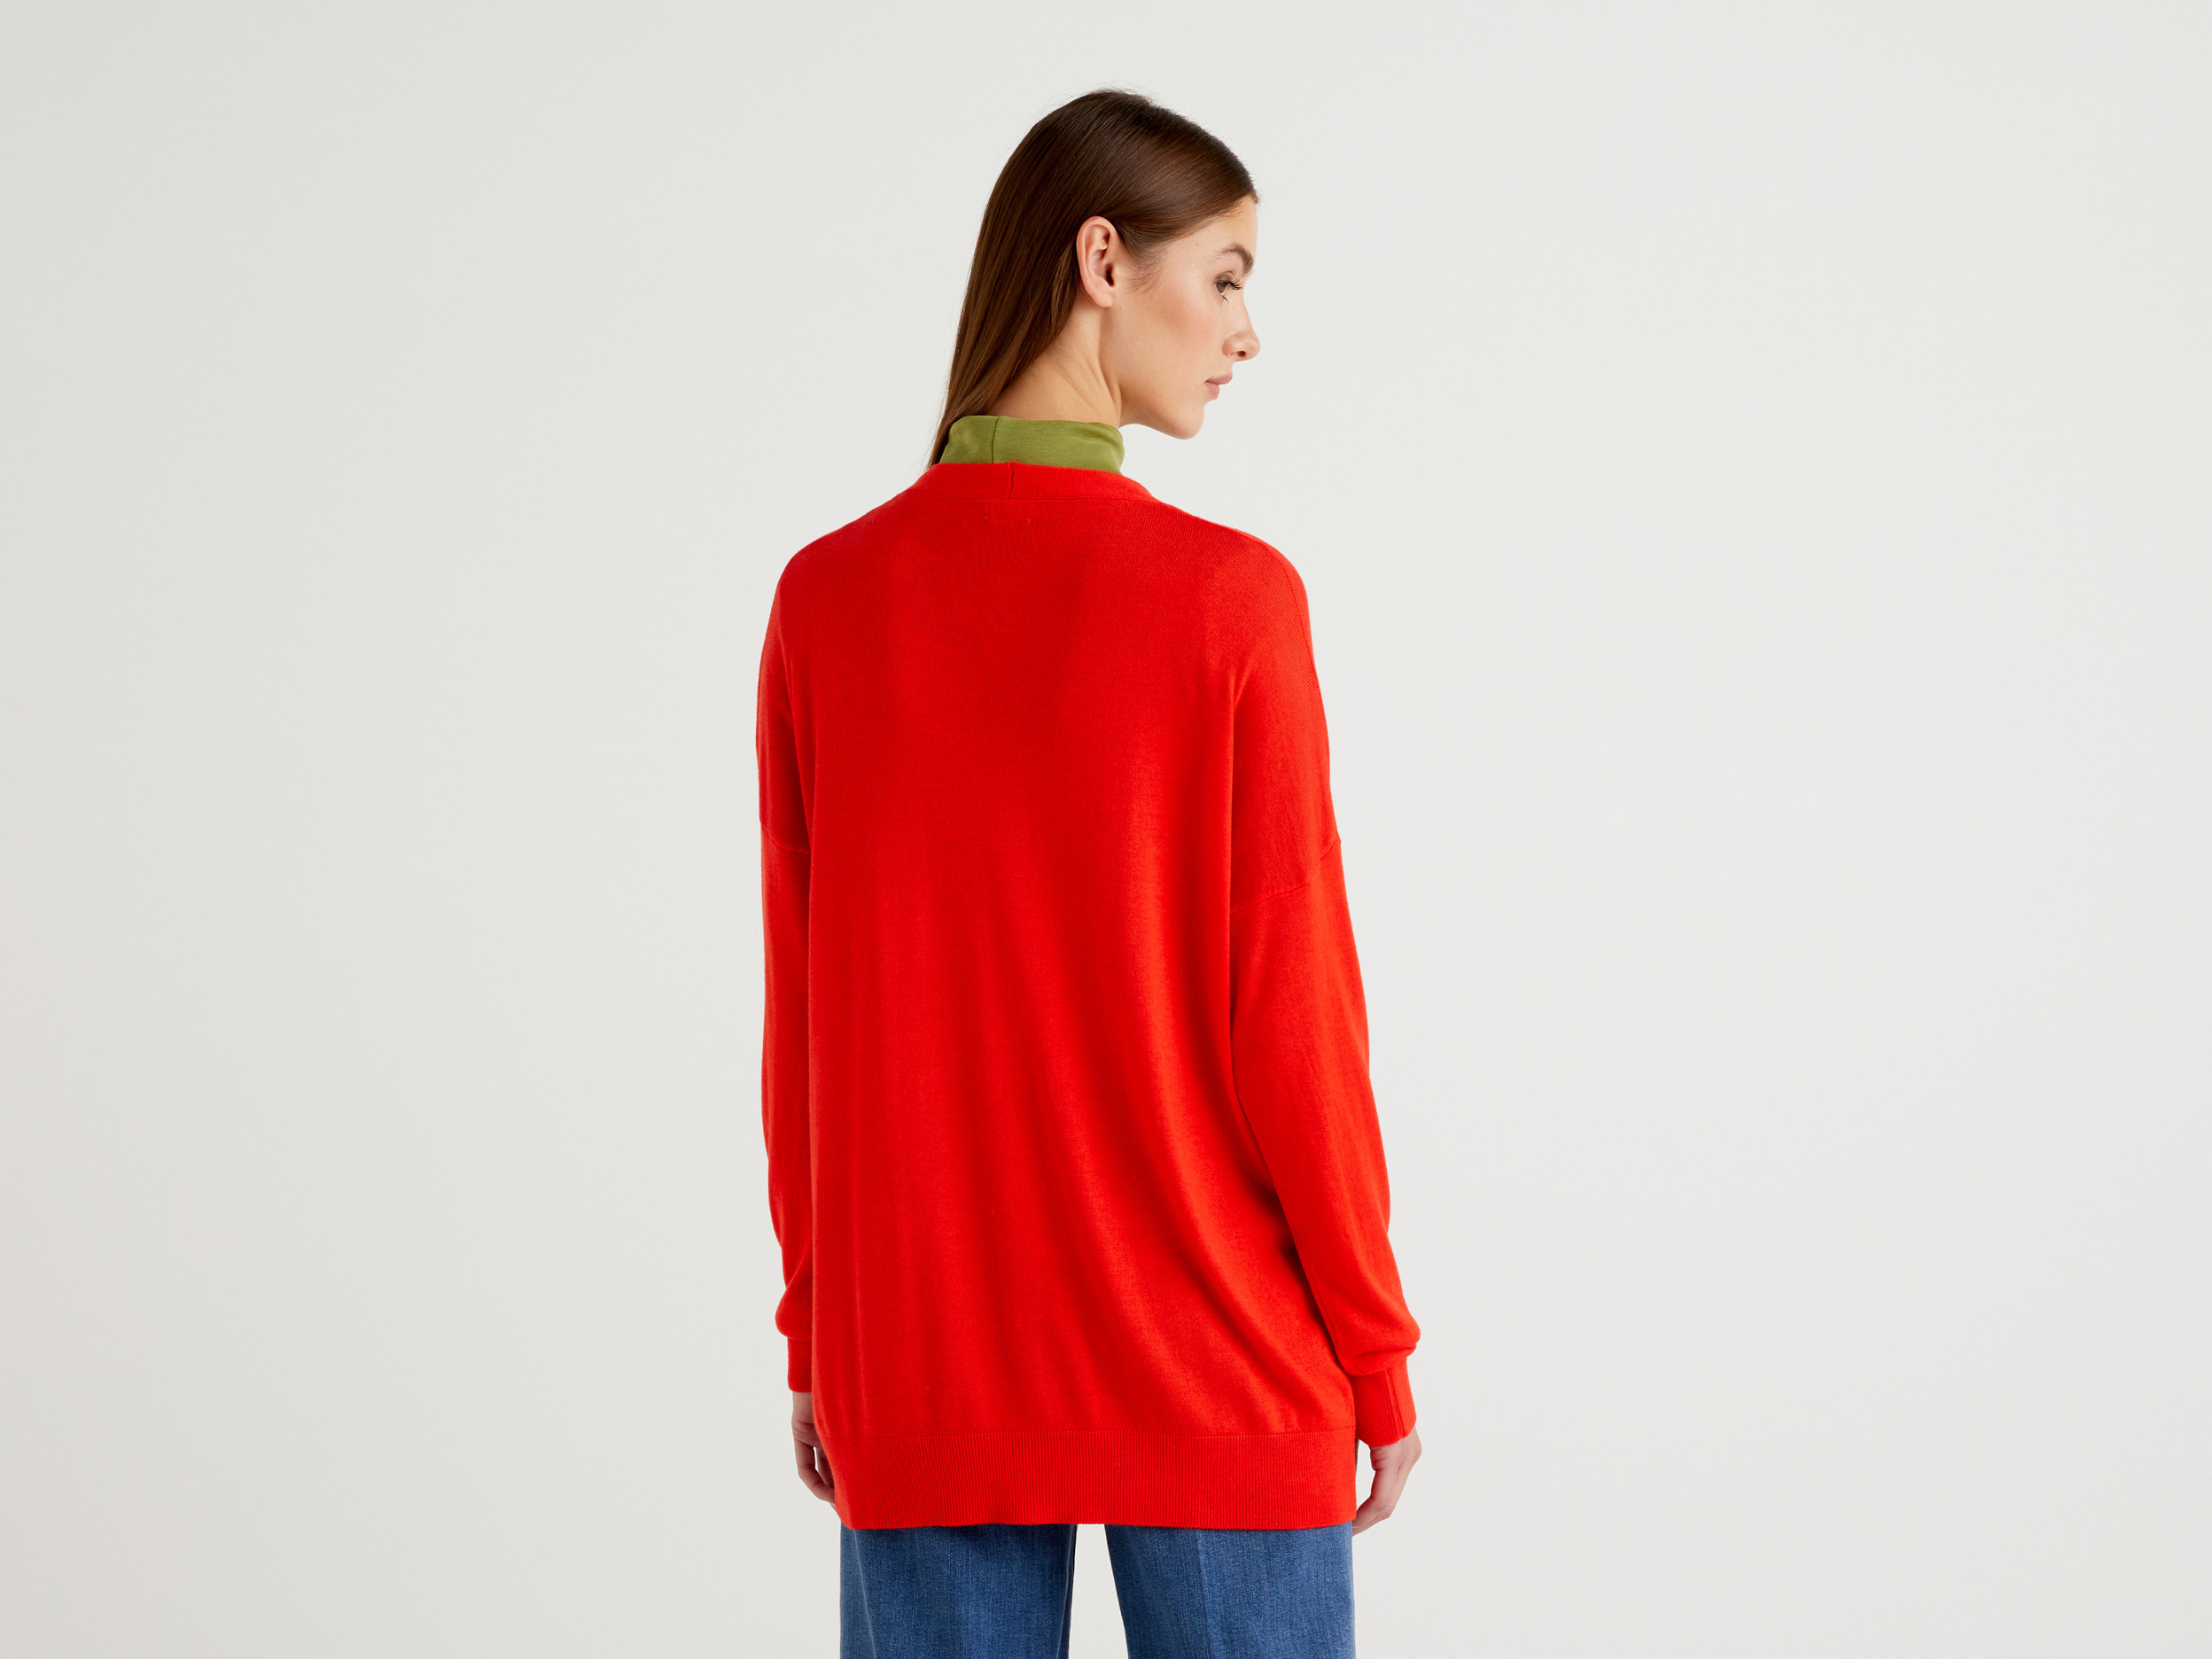 Benetton, Cardigan In Wool And Cashmere Blend, Taglia L, Red, Women